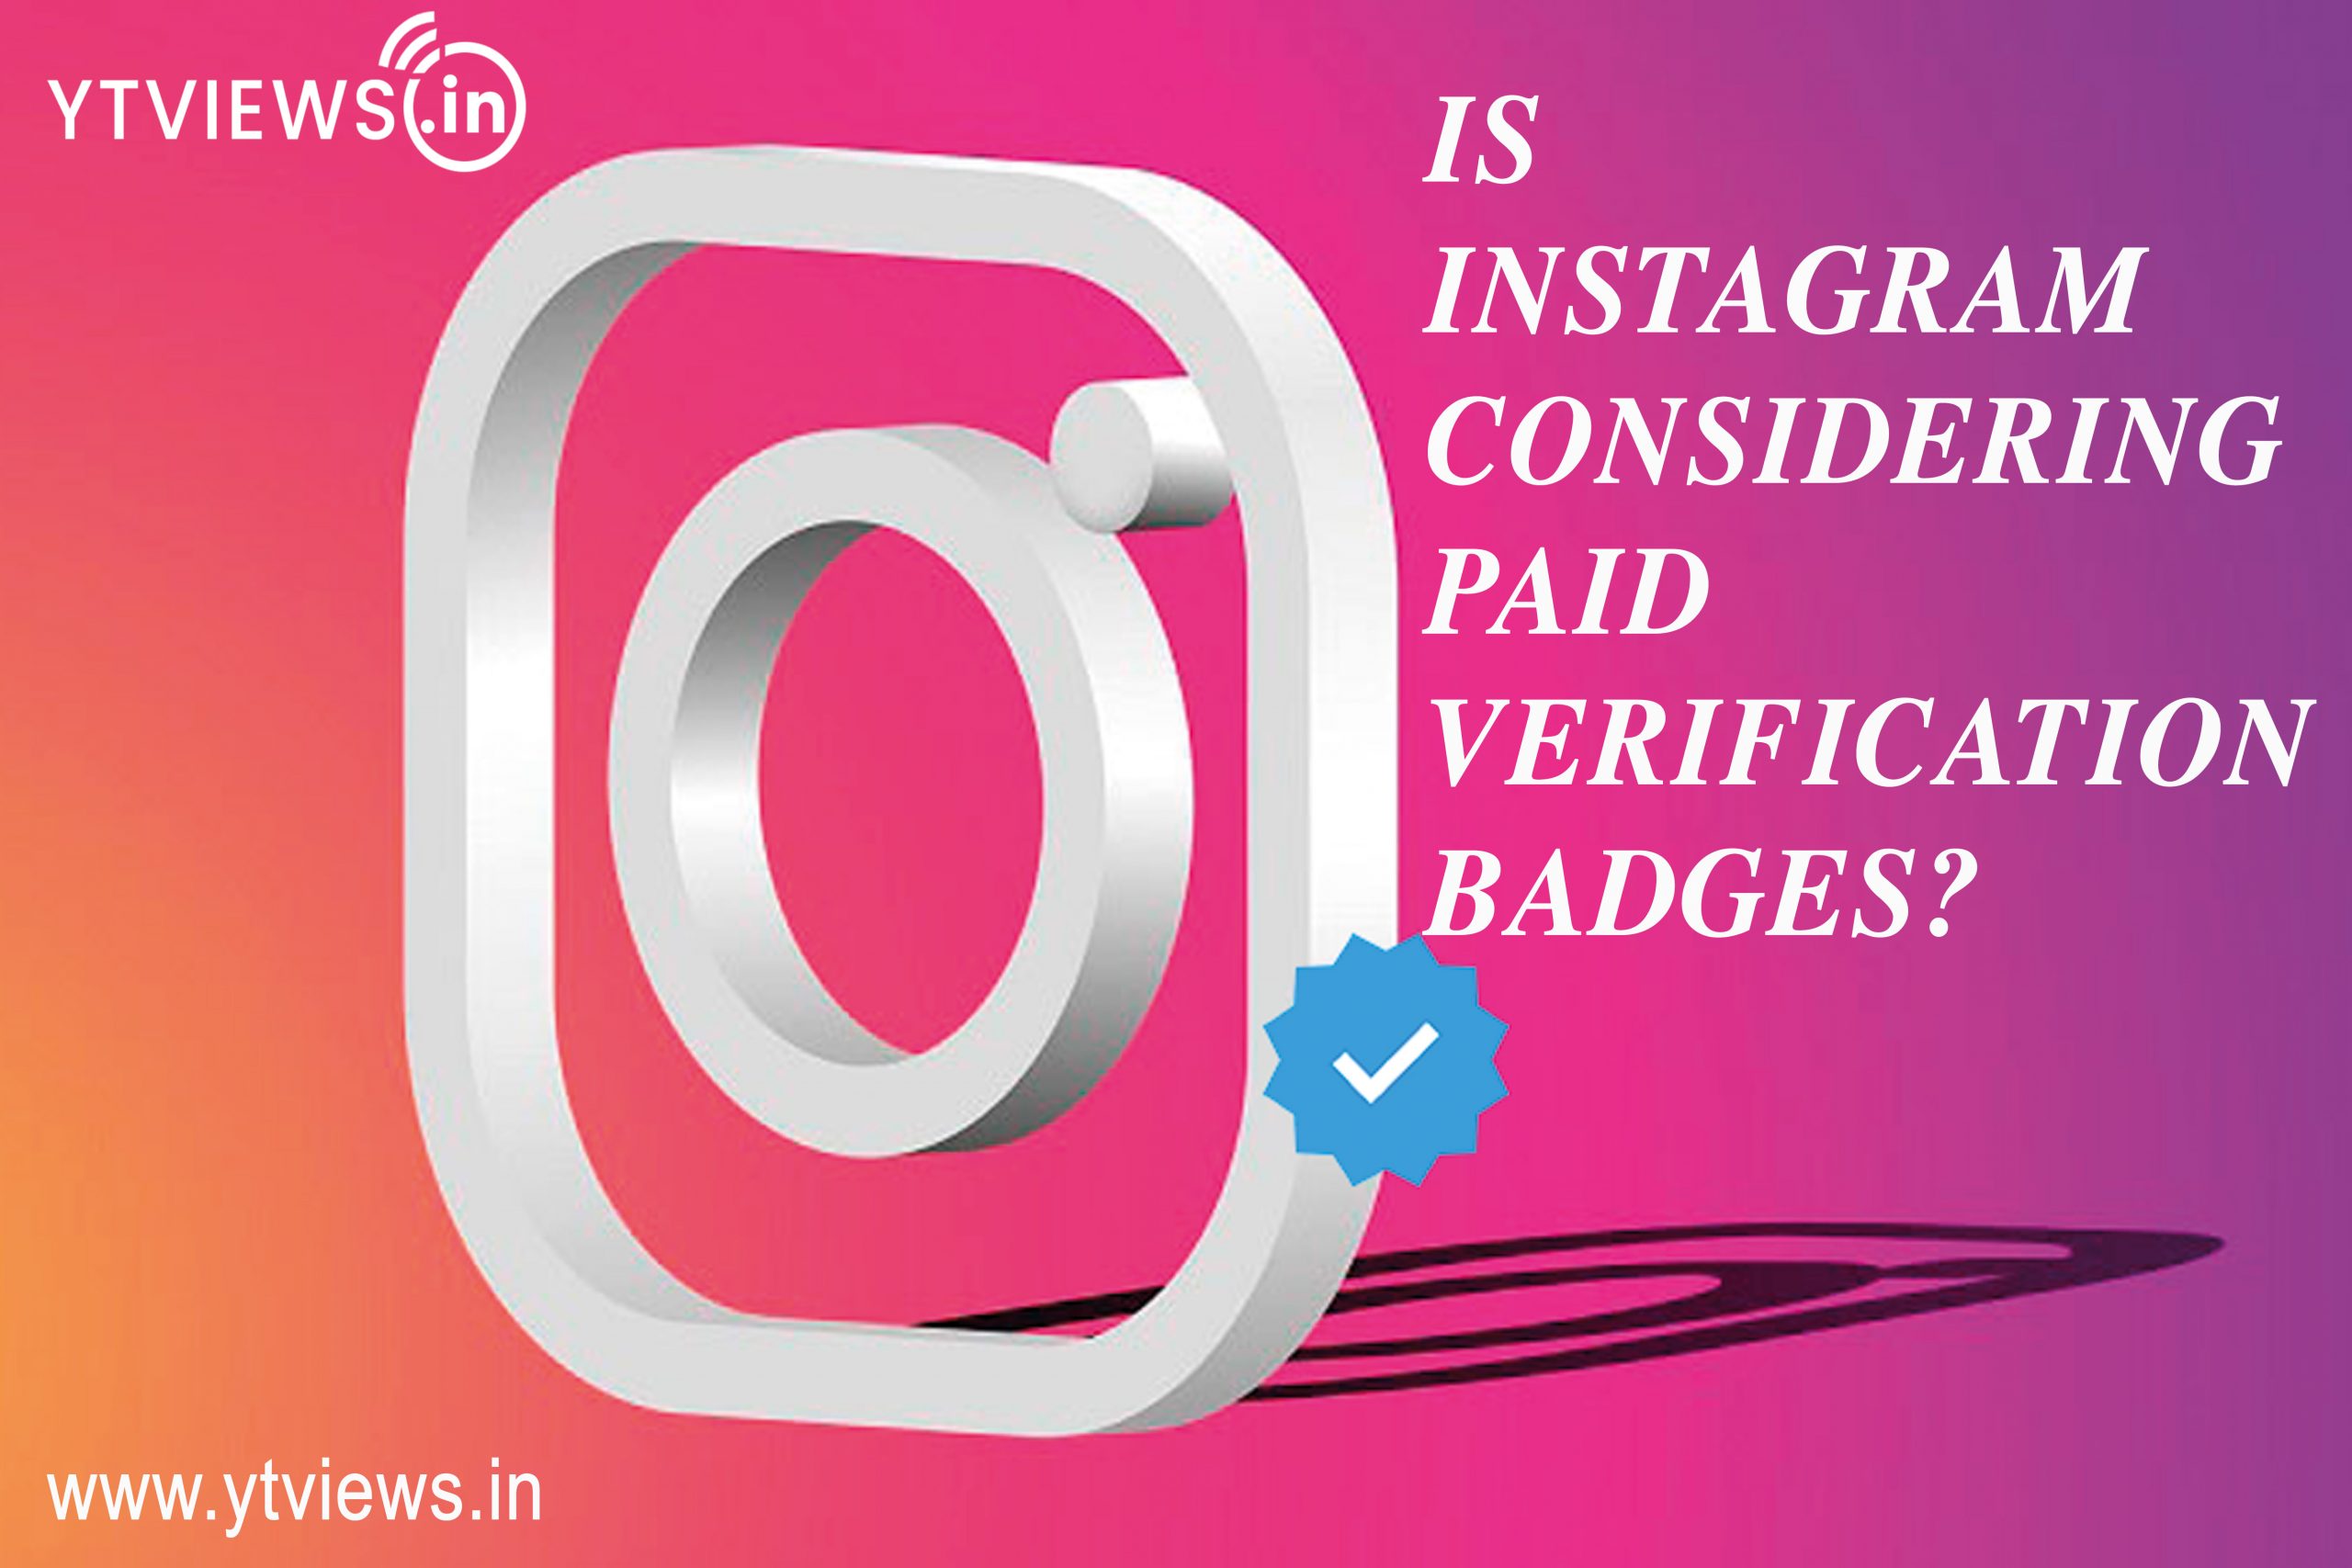 Is Instagram considering paid verification badges?